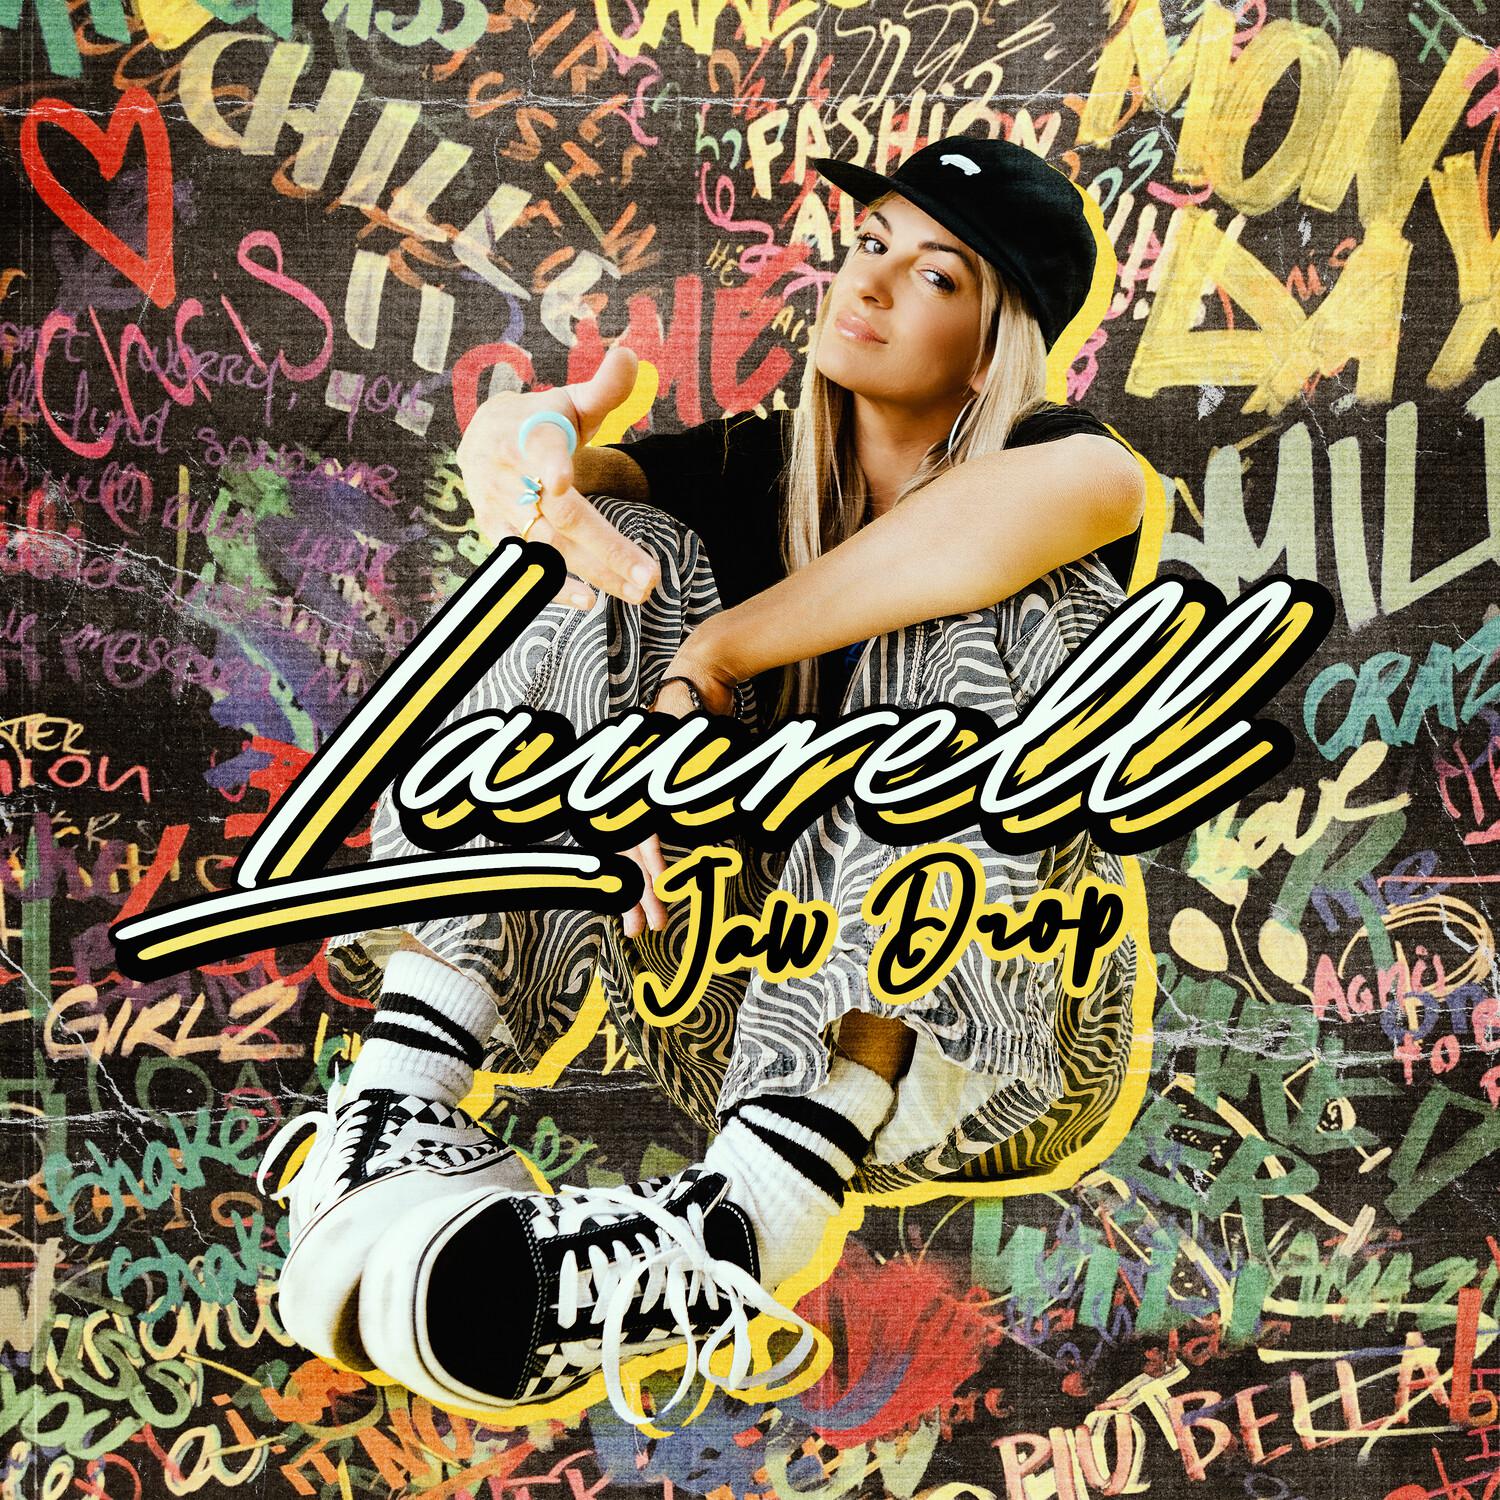 Laurell - Have Some Fun